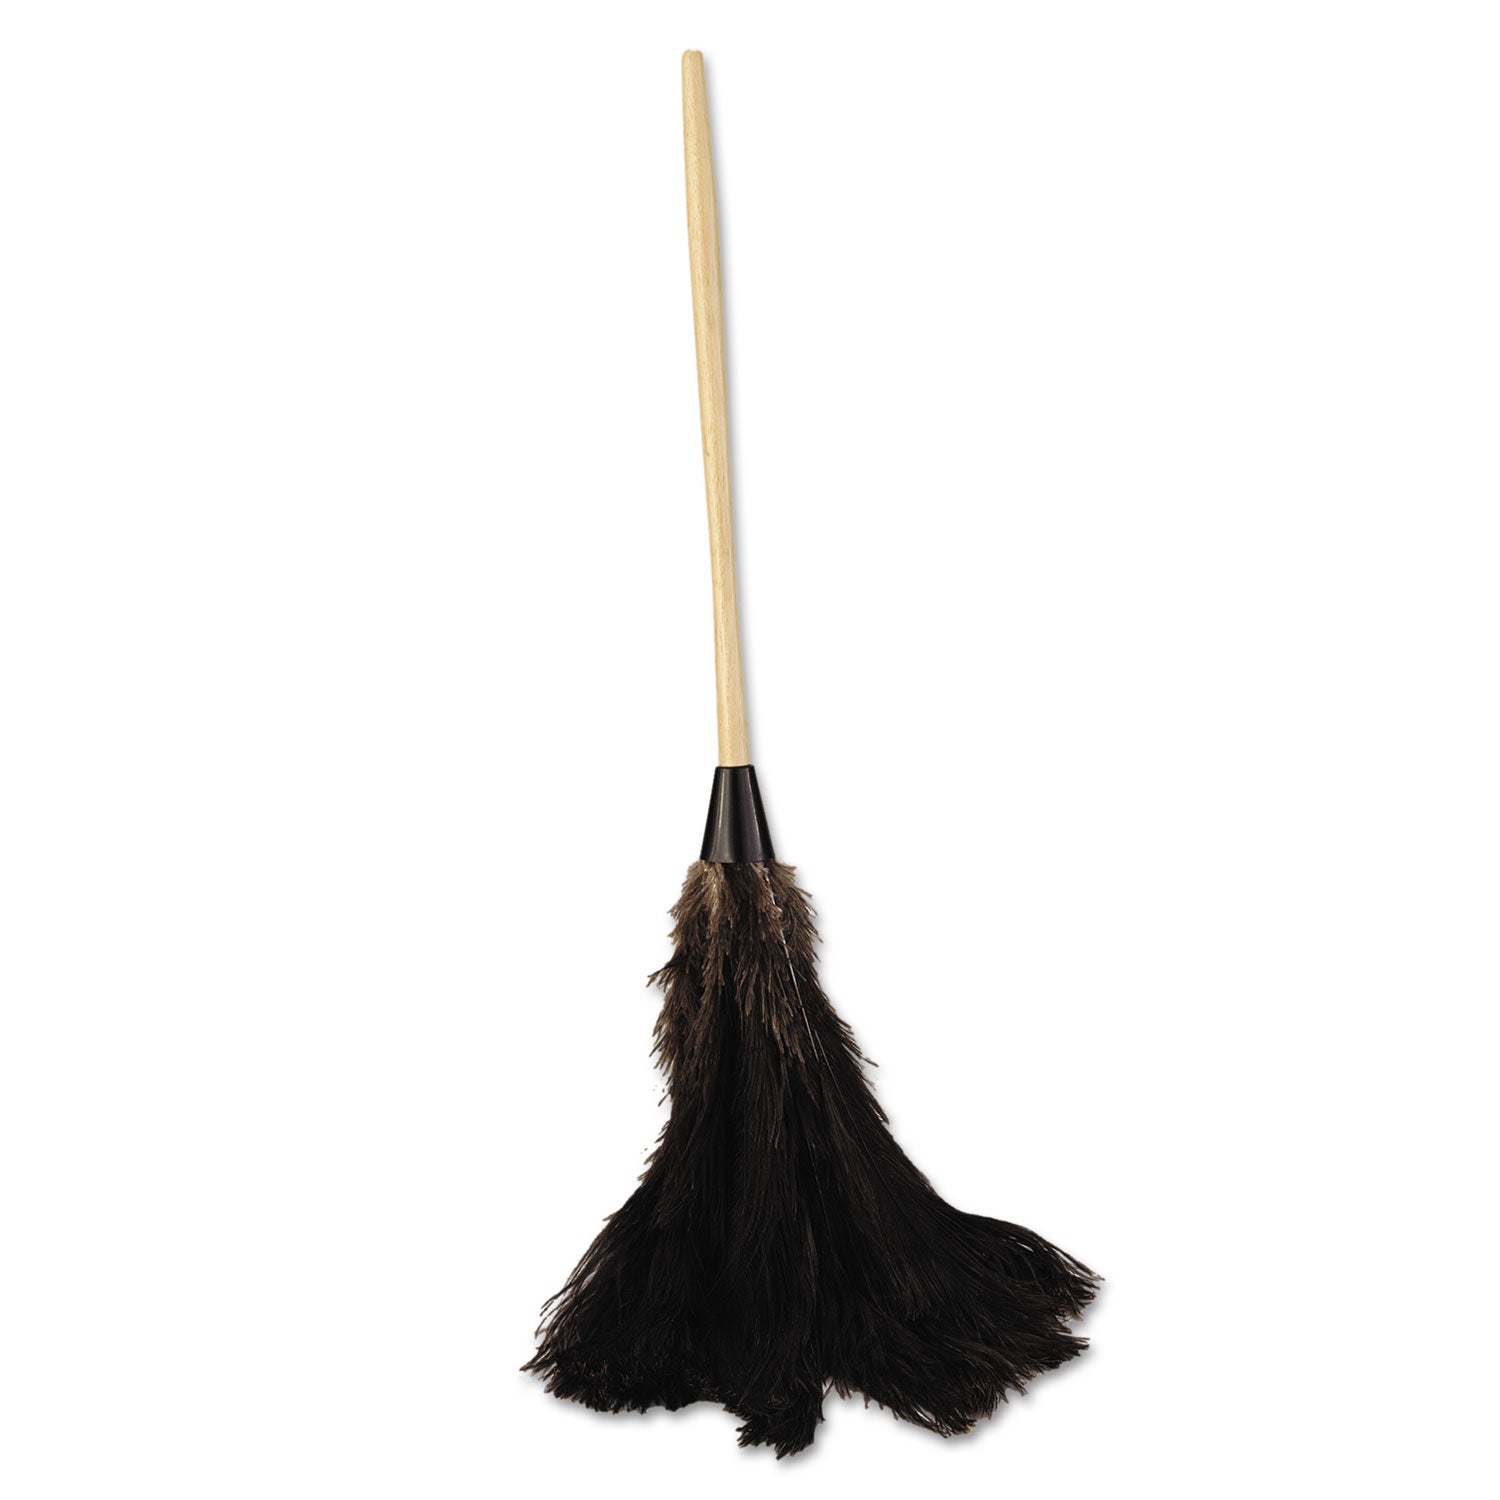 professional-ostrich-feather-duster-16-handle_bwk28bk - 1